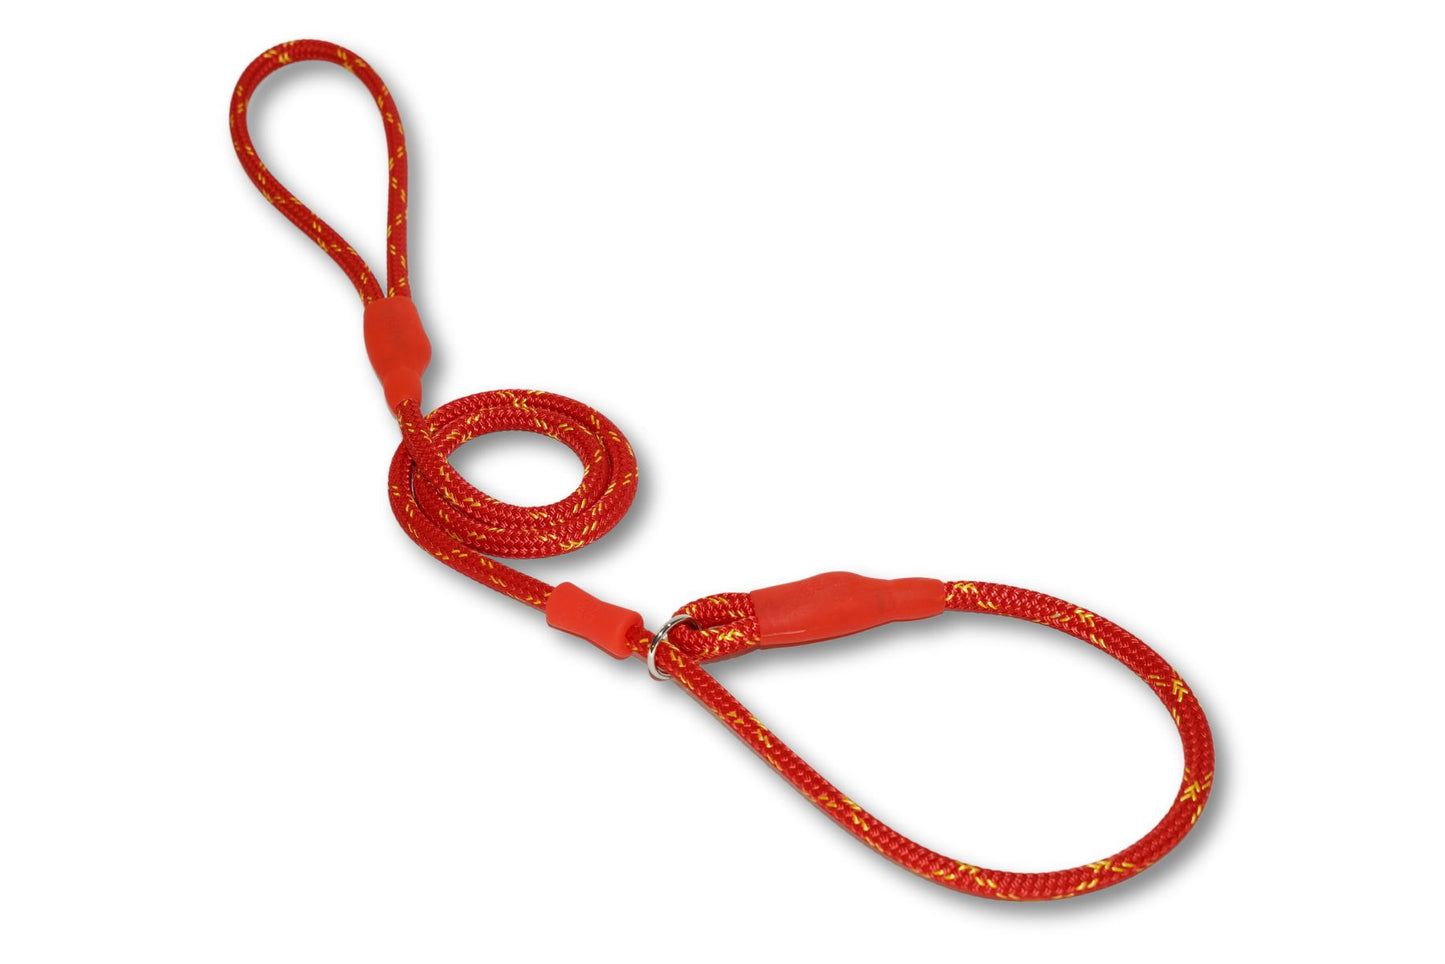 DNA - Ascent - Slip Lead - Strong Marine Rope Construction